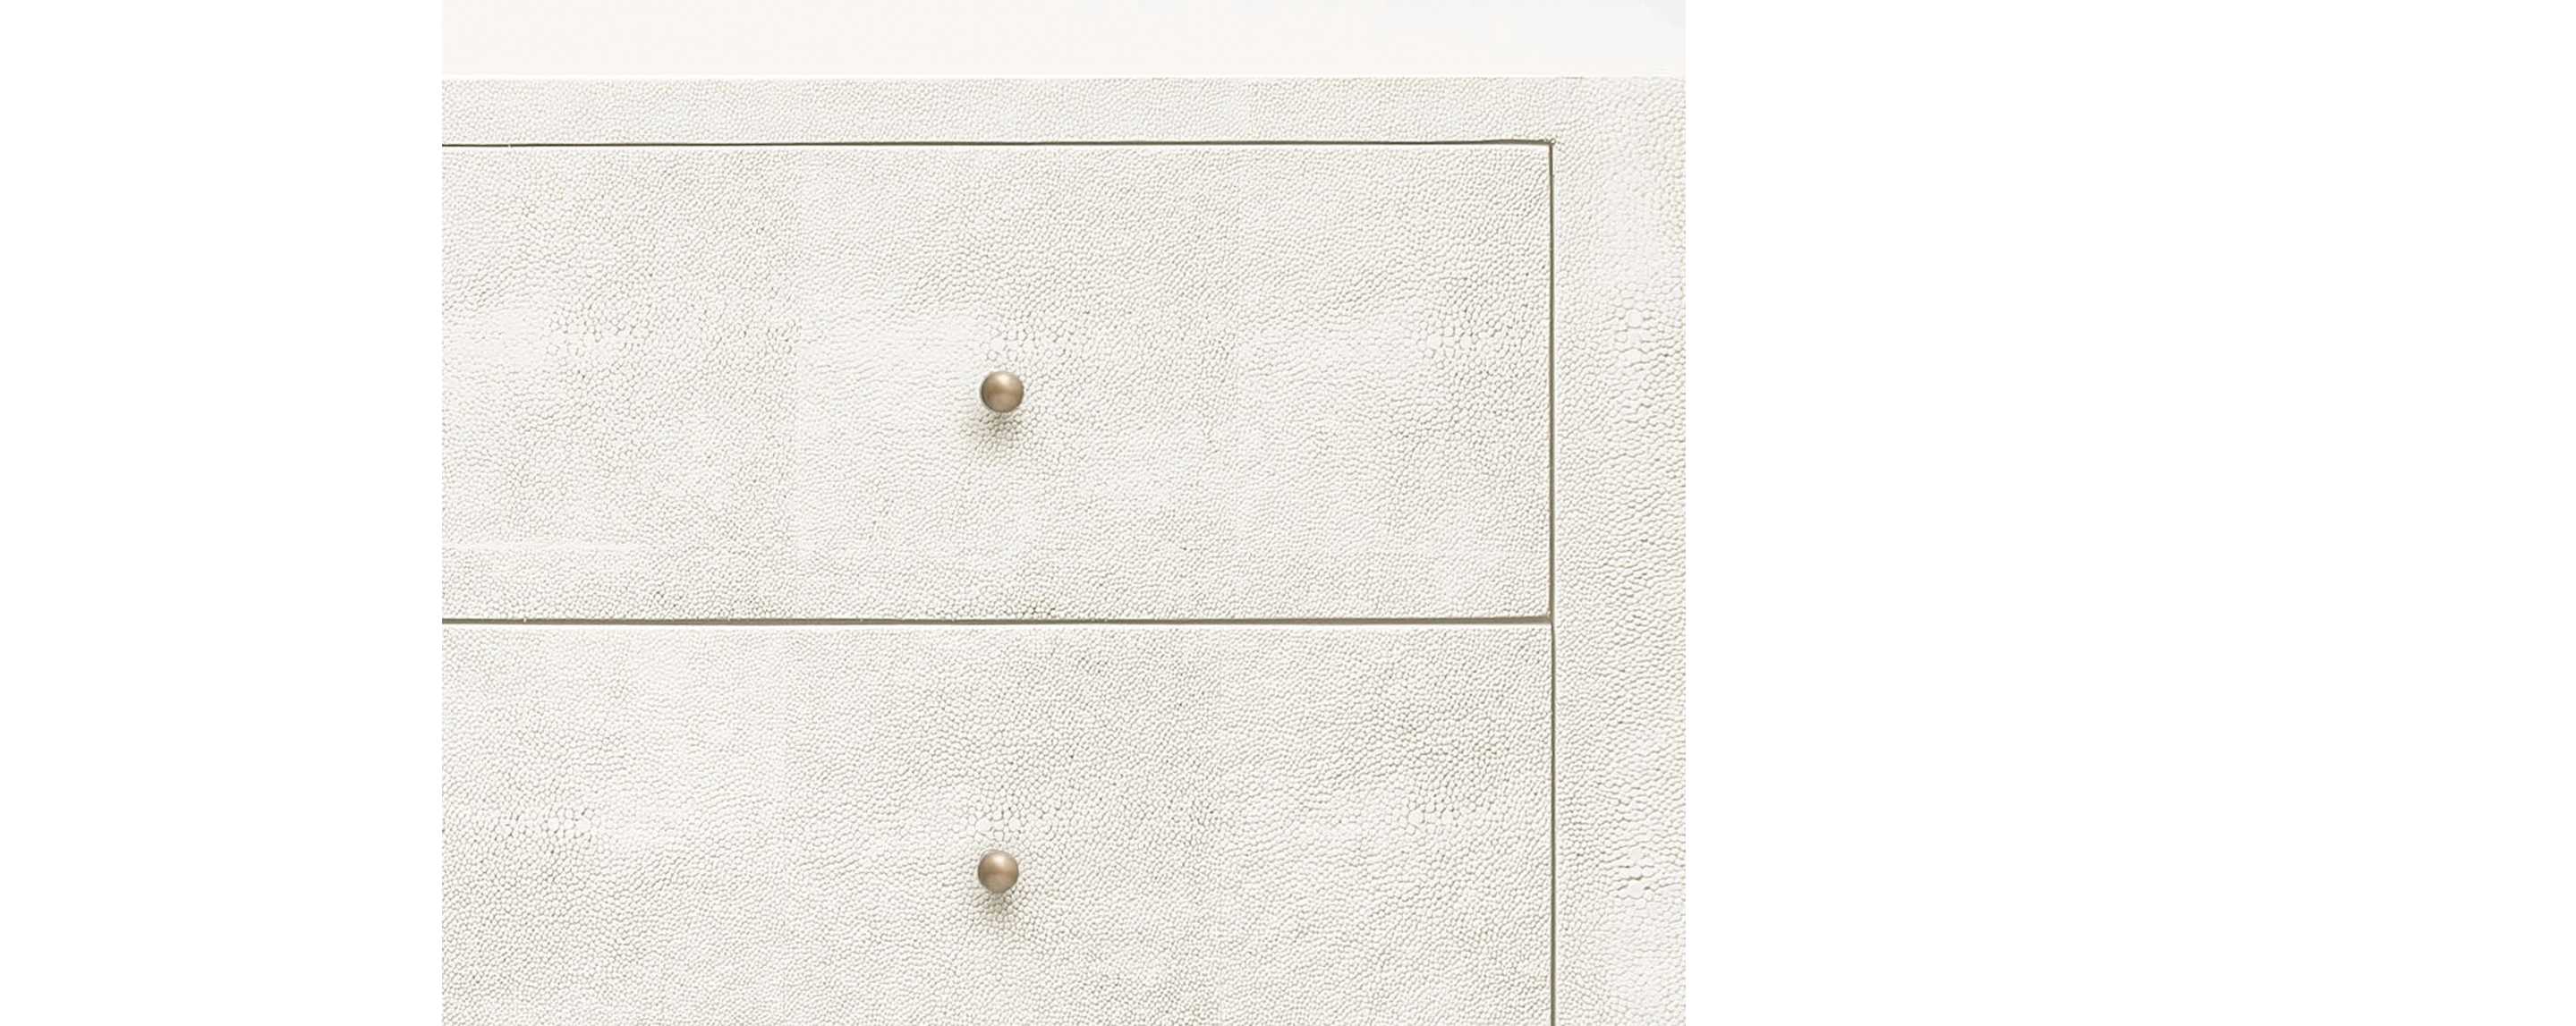 the faux shagreen wide pristine nightstand